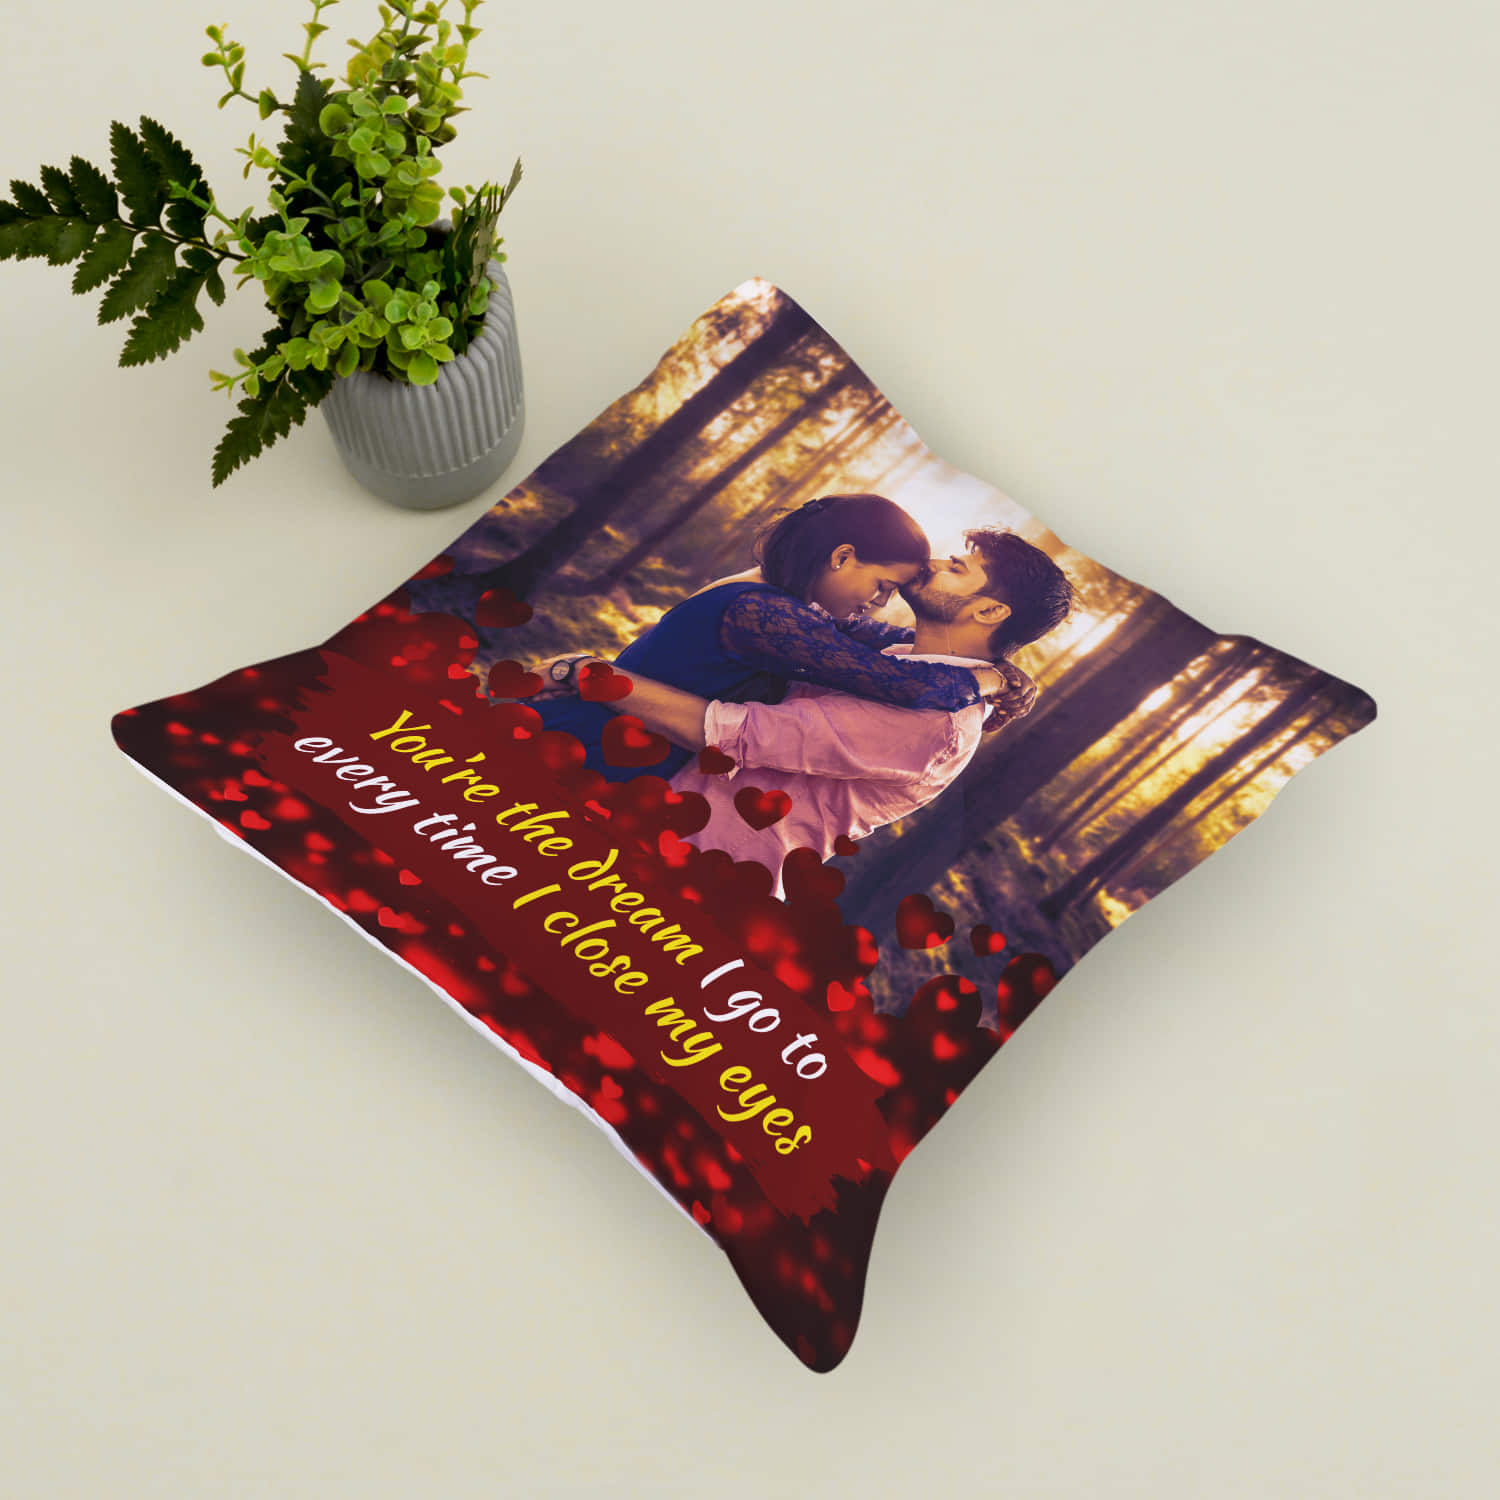 Customized Magic Pillow With Image Gift | A2ZEEGIFTS